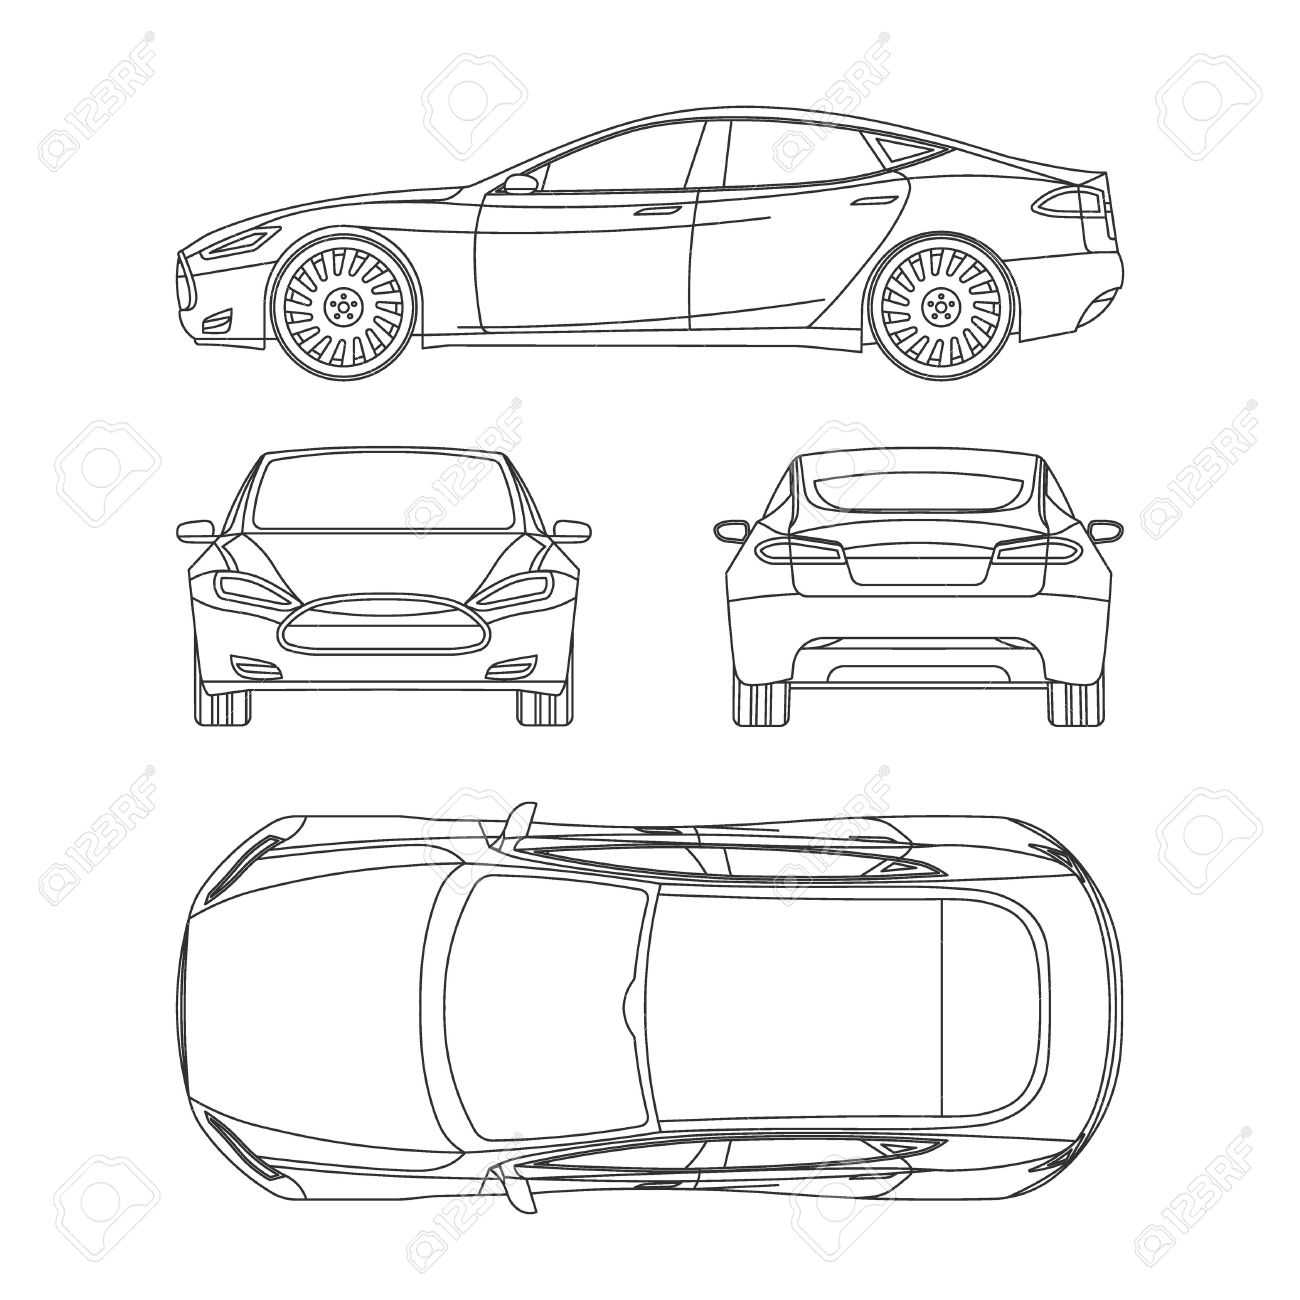 Car Line Draw Insurance, Rent Damage, Condition Report Form Blueprint In Car Damage Report Template